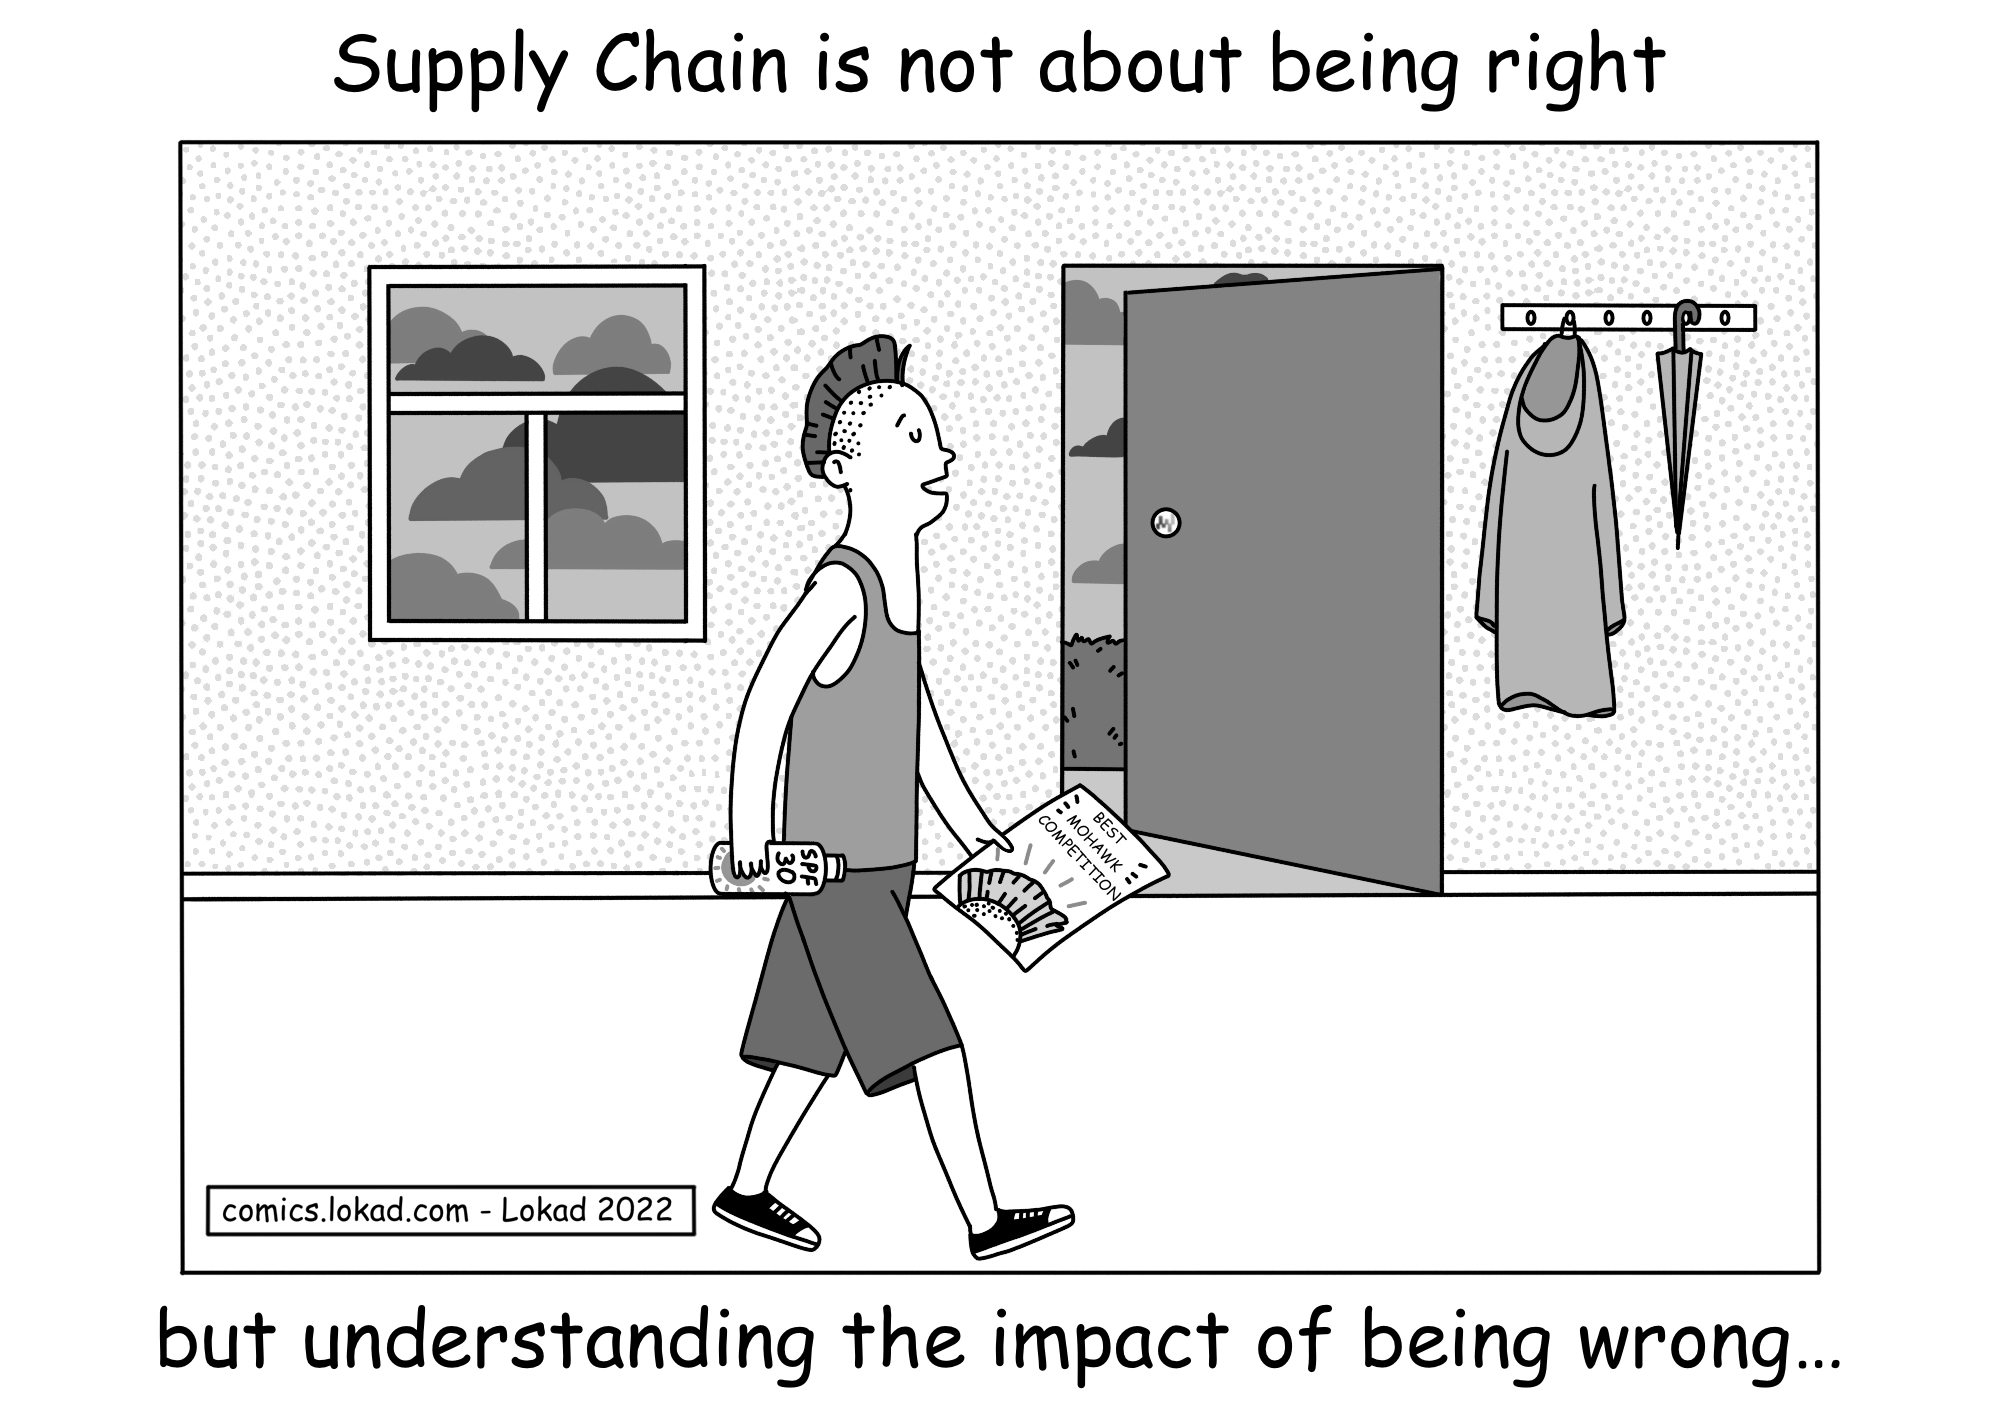 Supply chain is not about being right